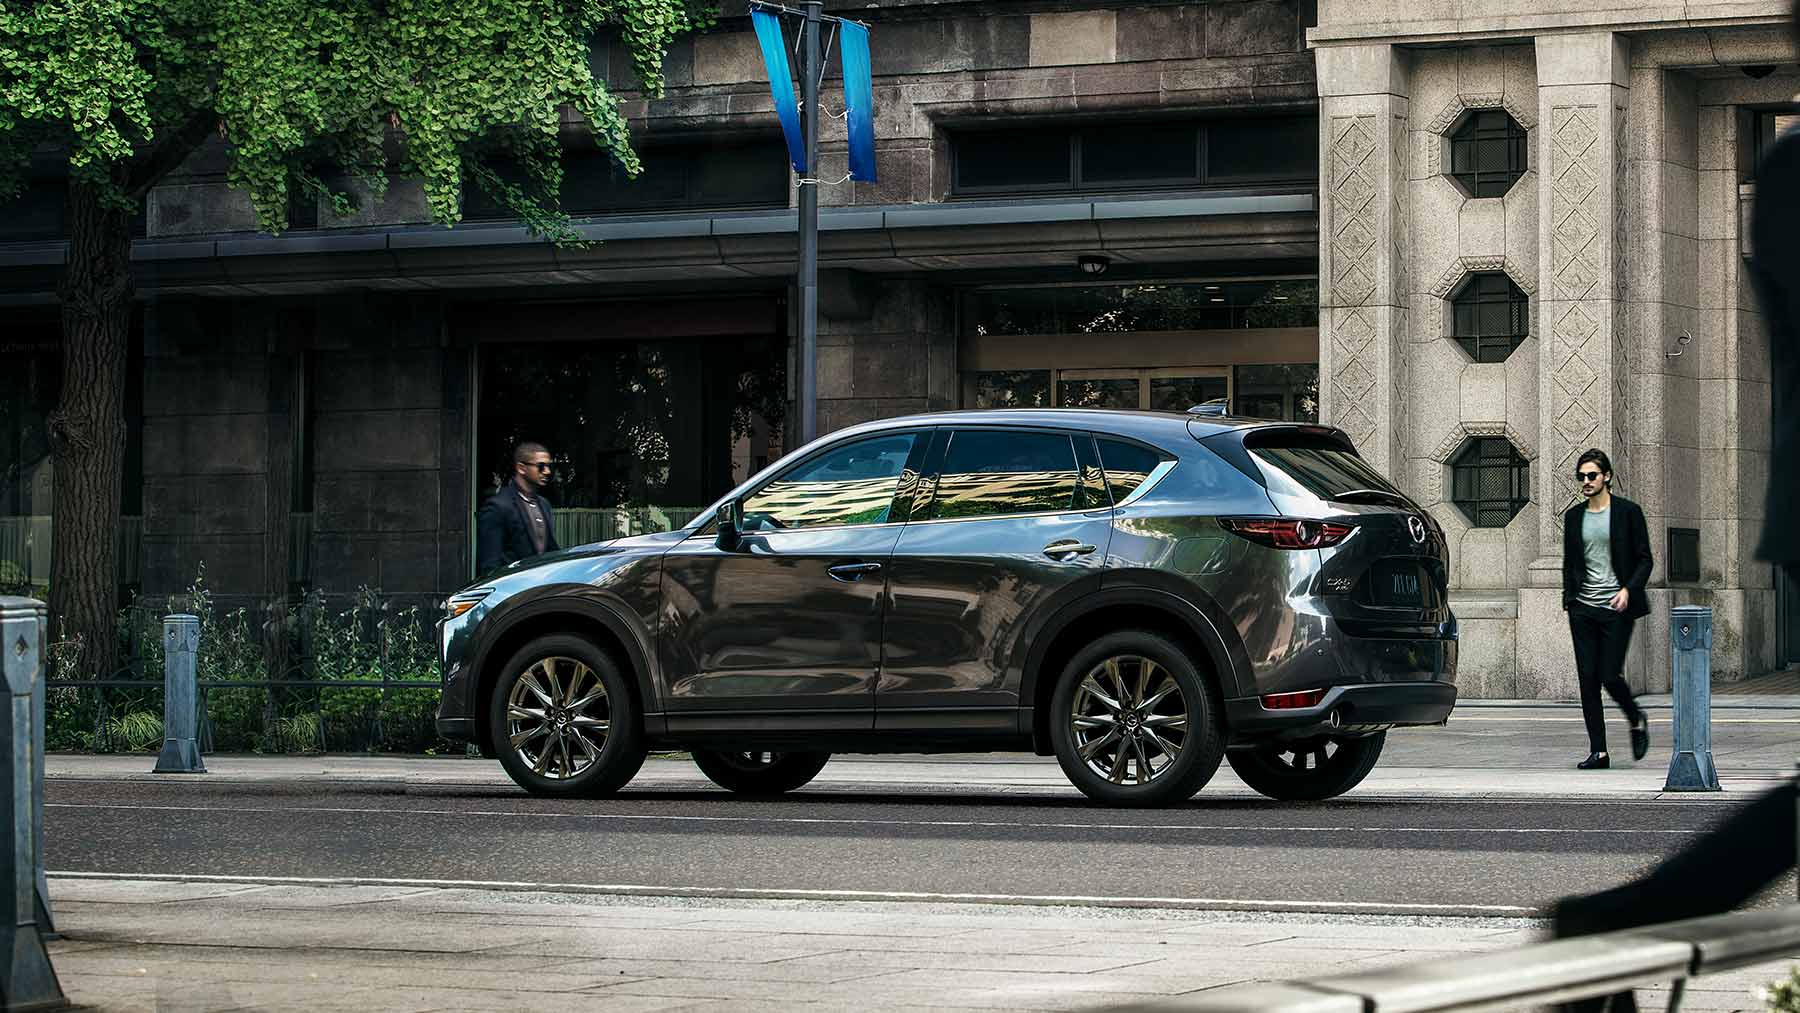 2020 Mazda Cx 5 Overview The News Wheel